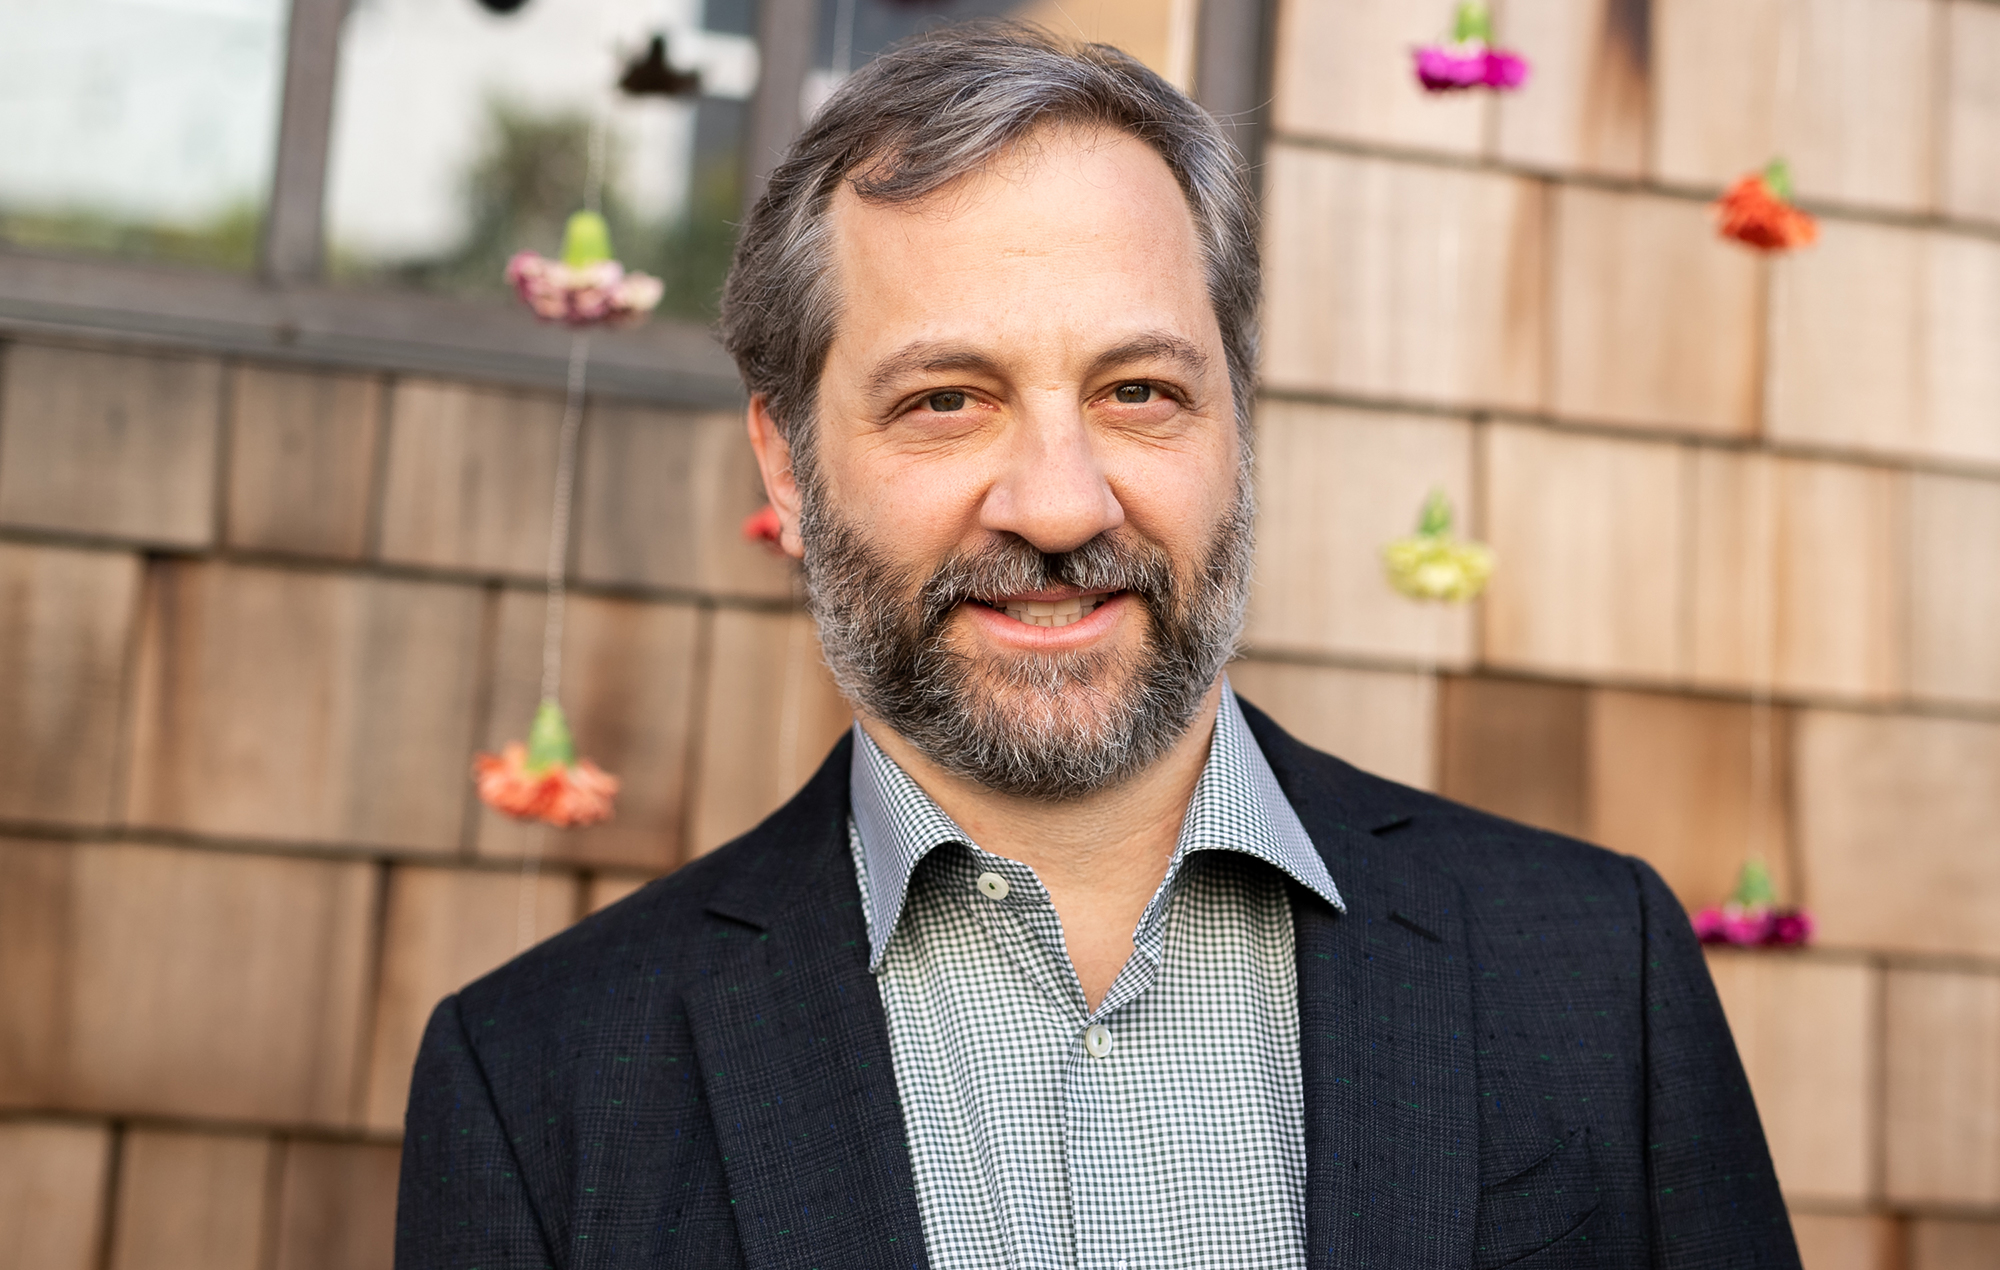 Judd Apatow Net Worth $160 Million - Passionate About Drama And Comedy Films